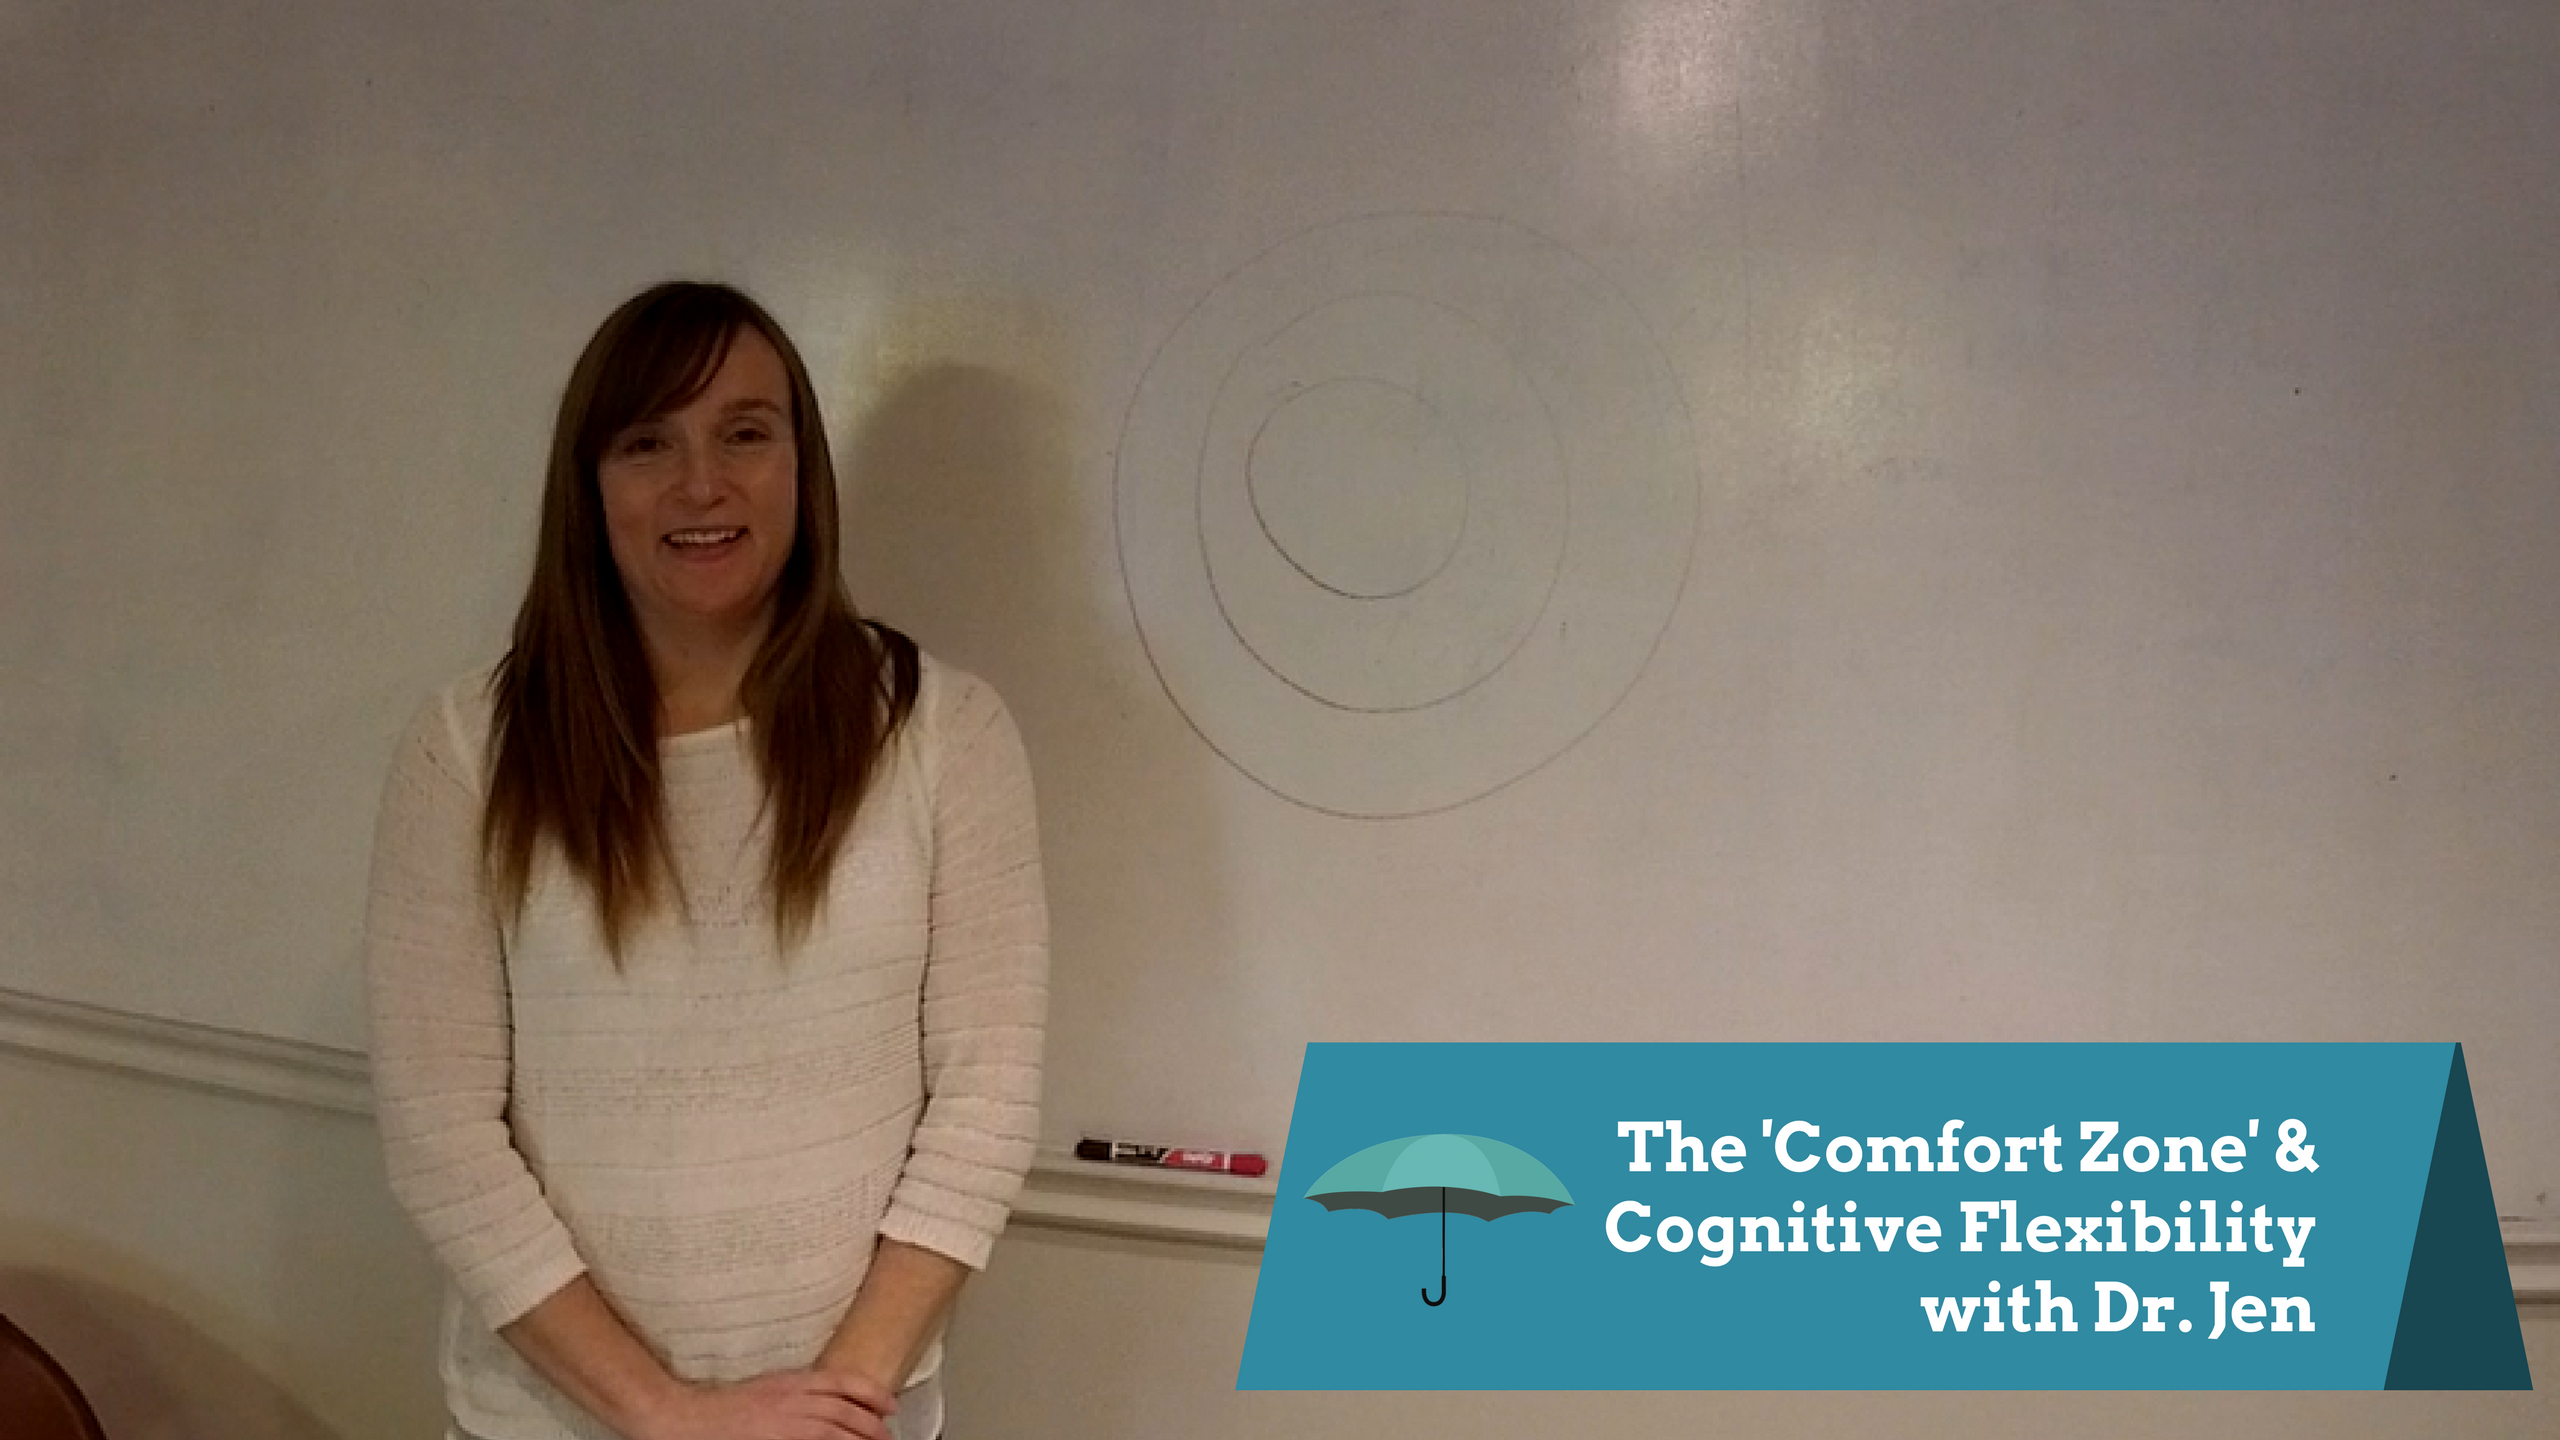 The ‘Comfort Zone’ and Cognitive Flexibility with Dr. Jen